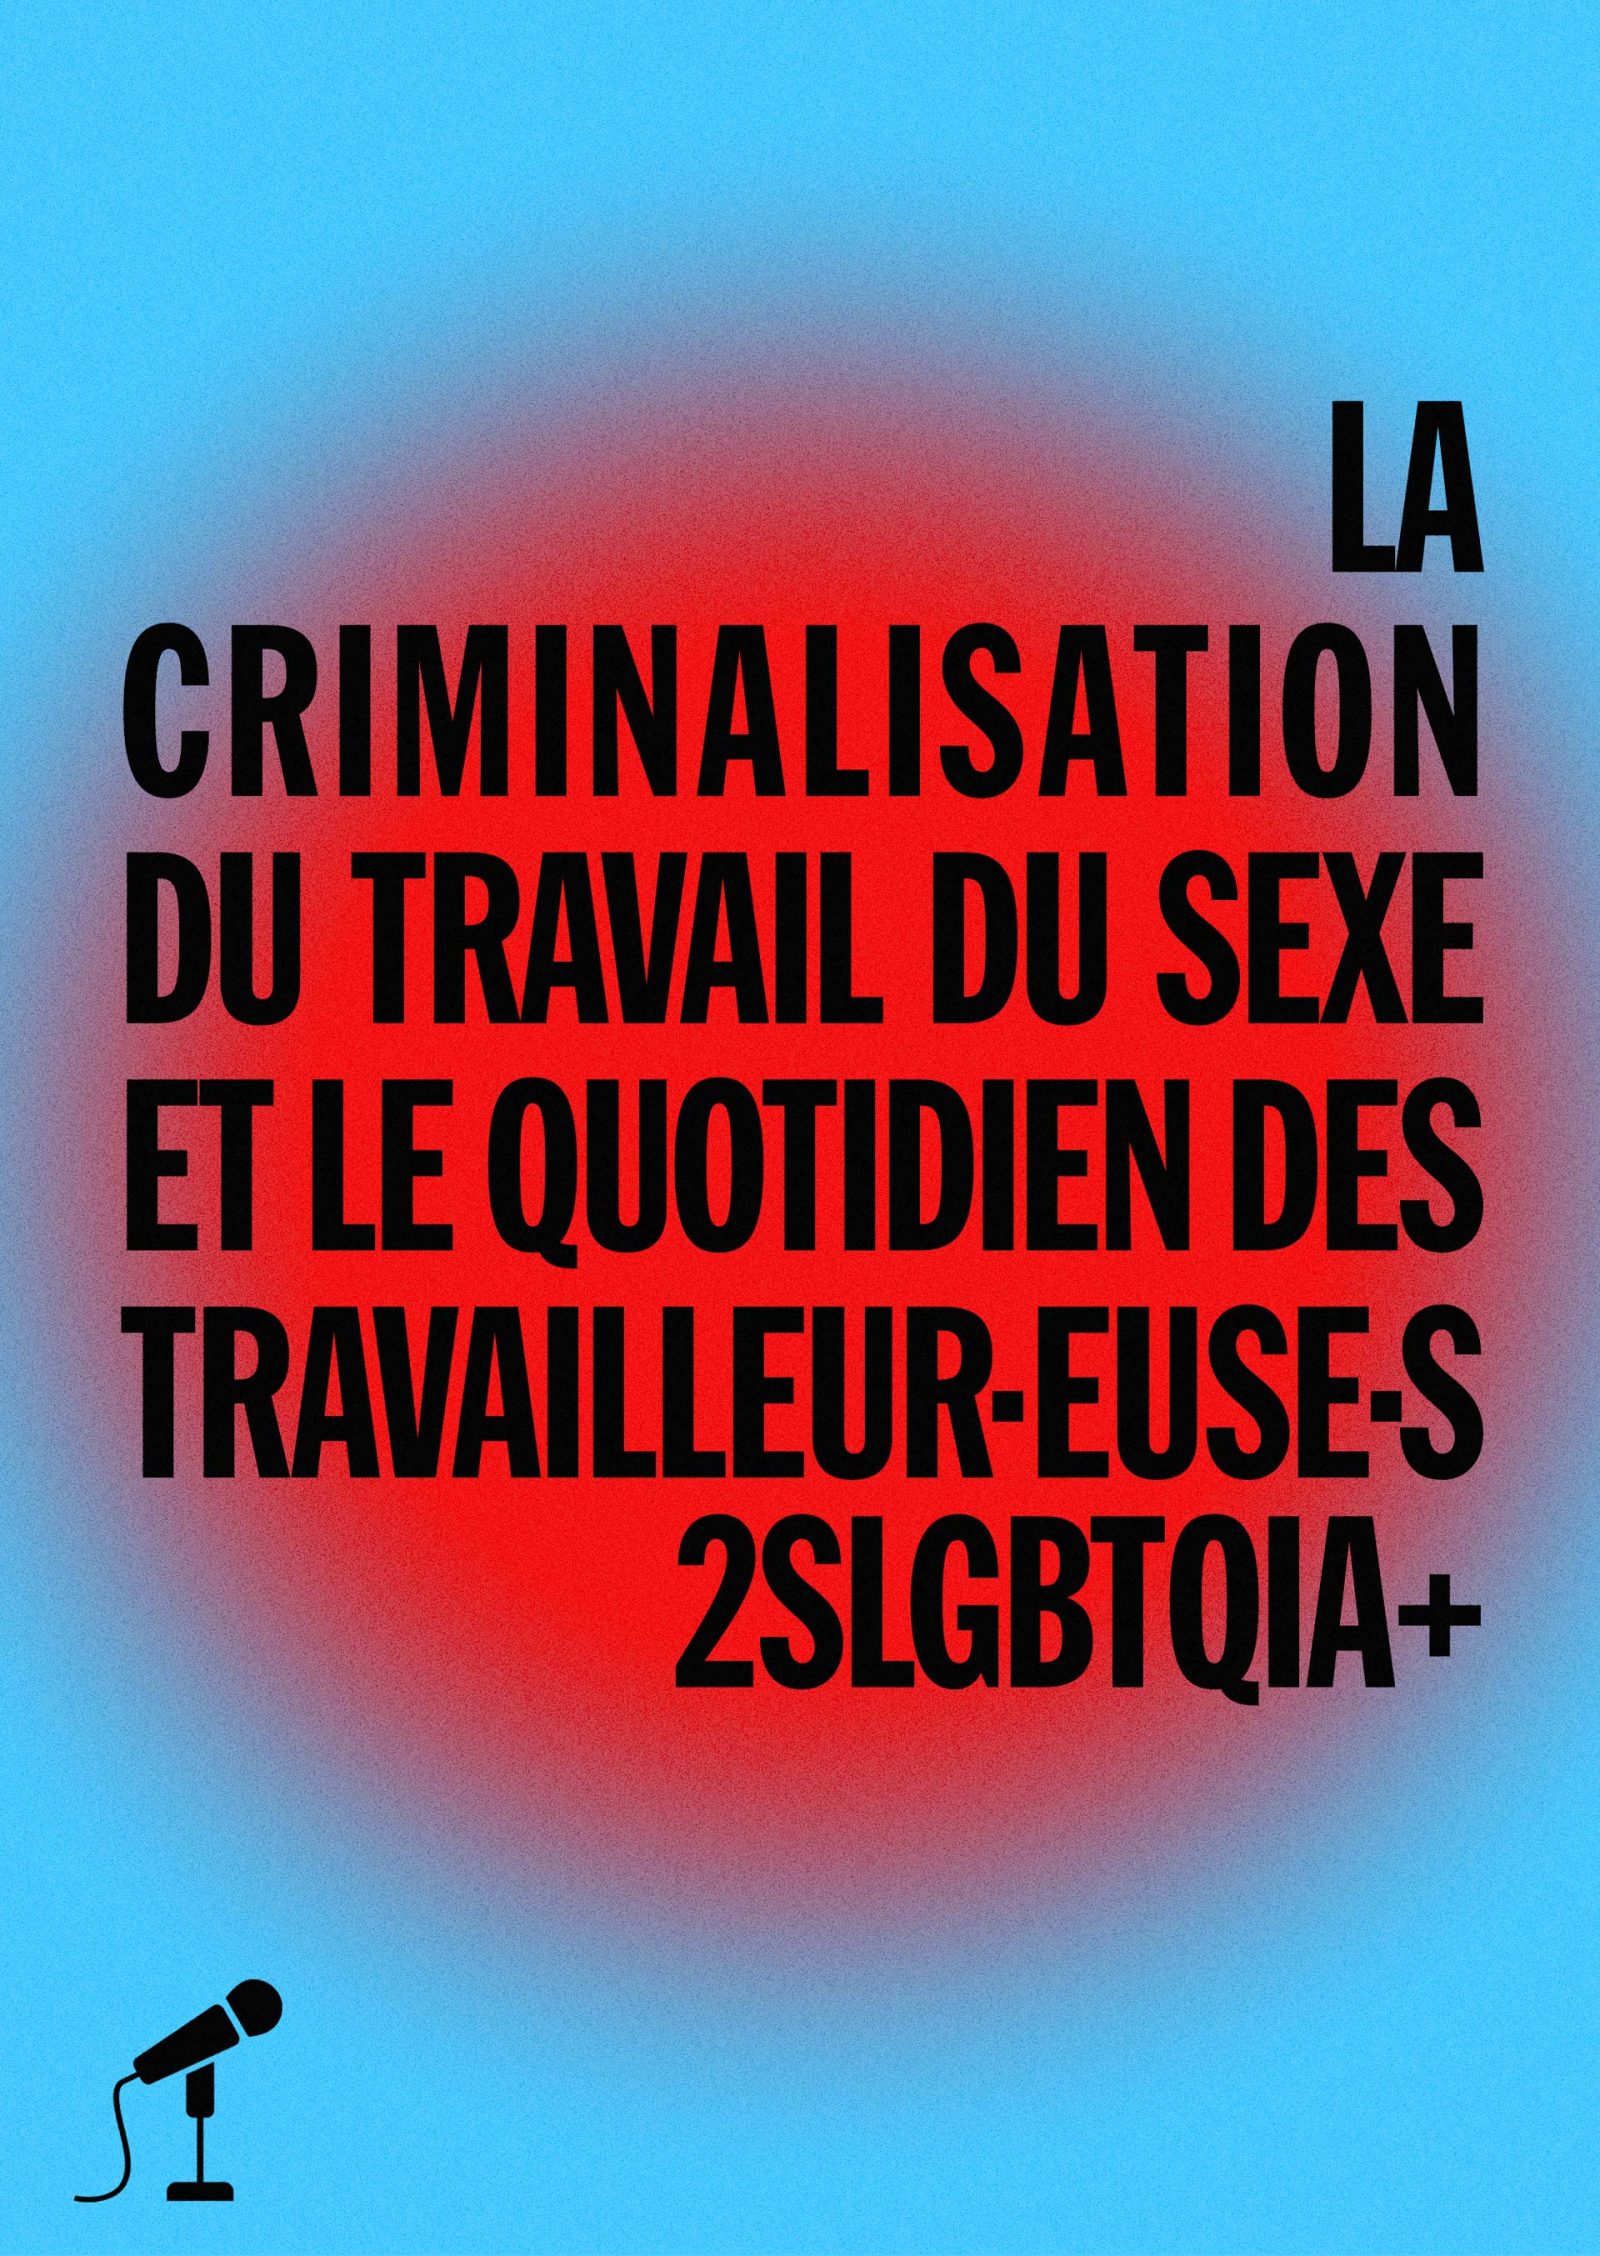 The Criminalization Of Sex Work And The Daily Life Of 2slgbtqia Sex Workers In Magazine